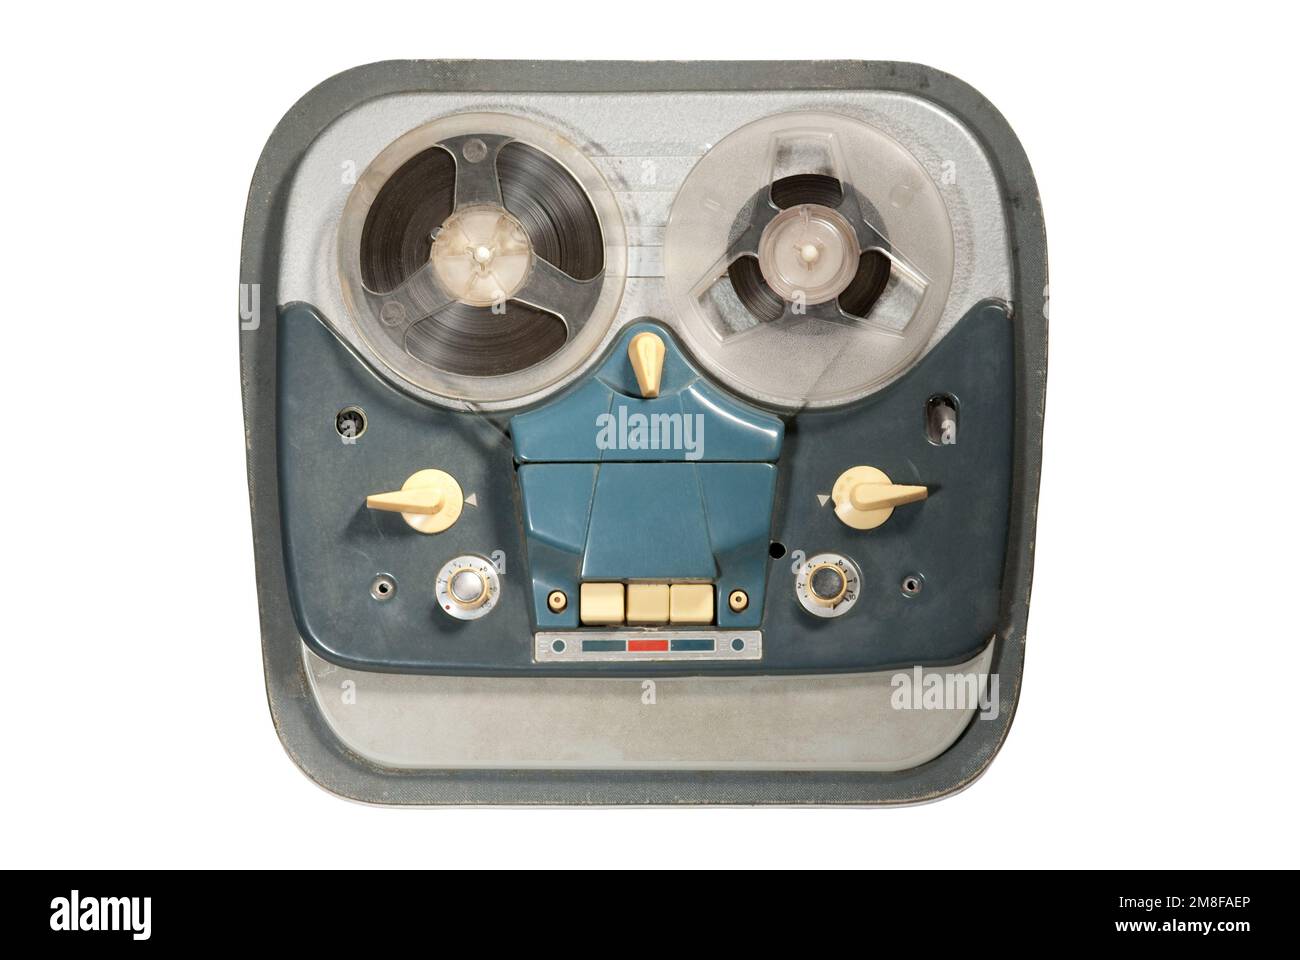 Grundig reel to reel tape recorder from the 1960's Stock Photo - Alamy